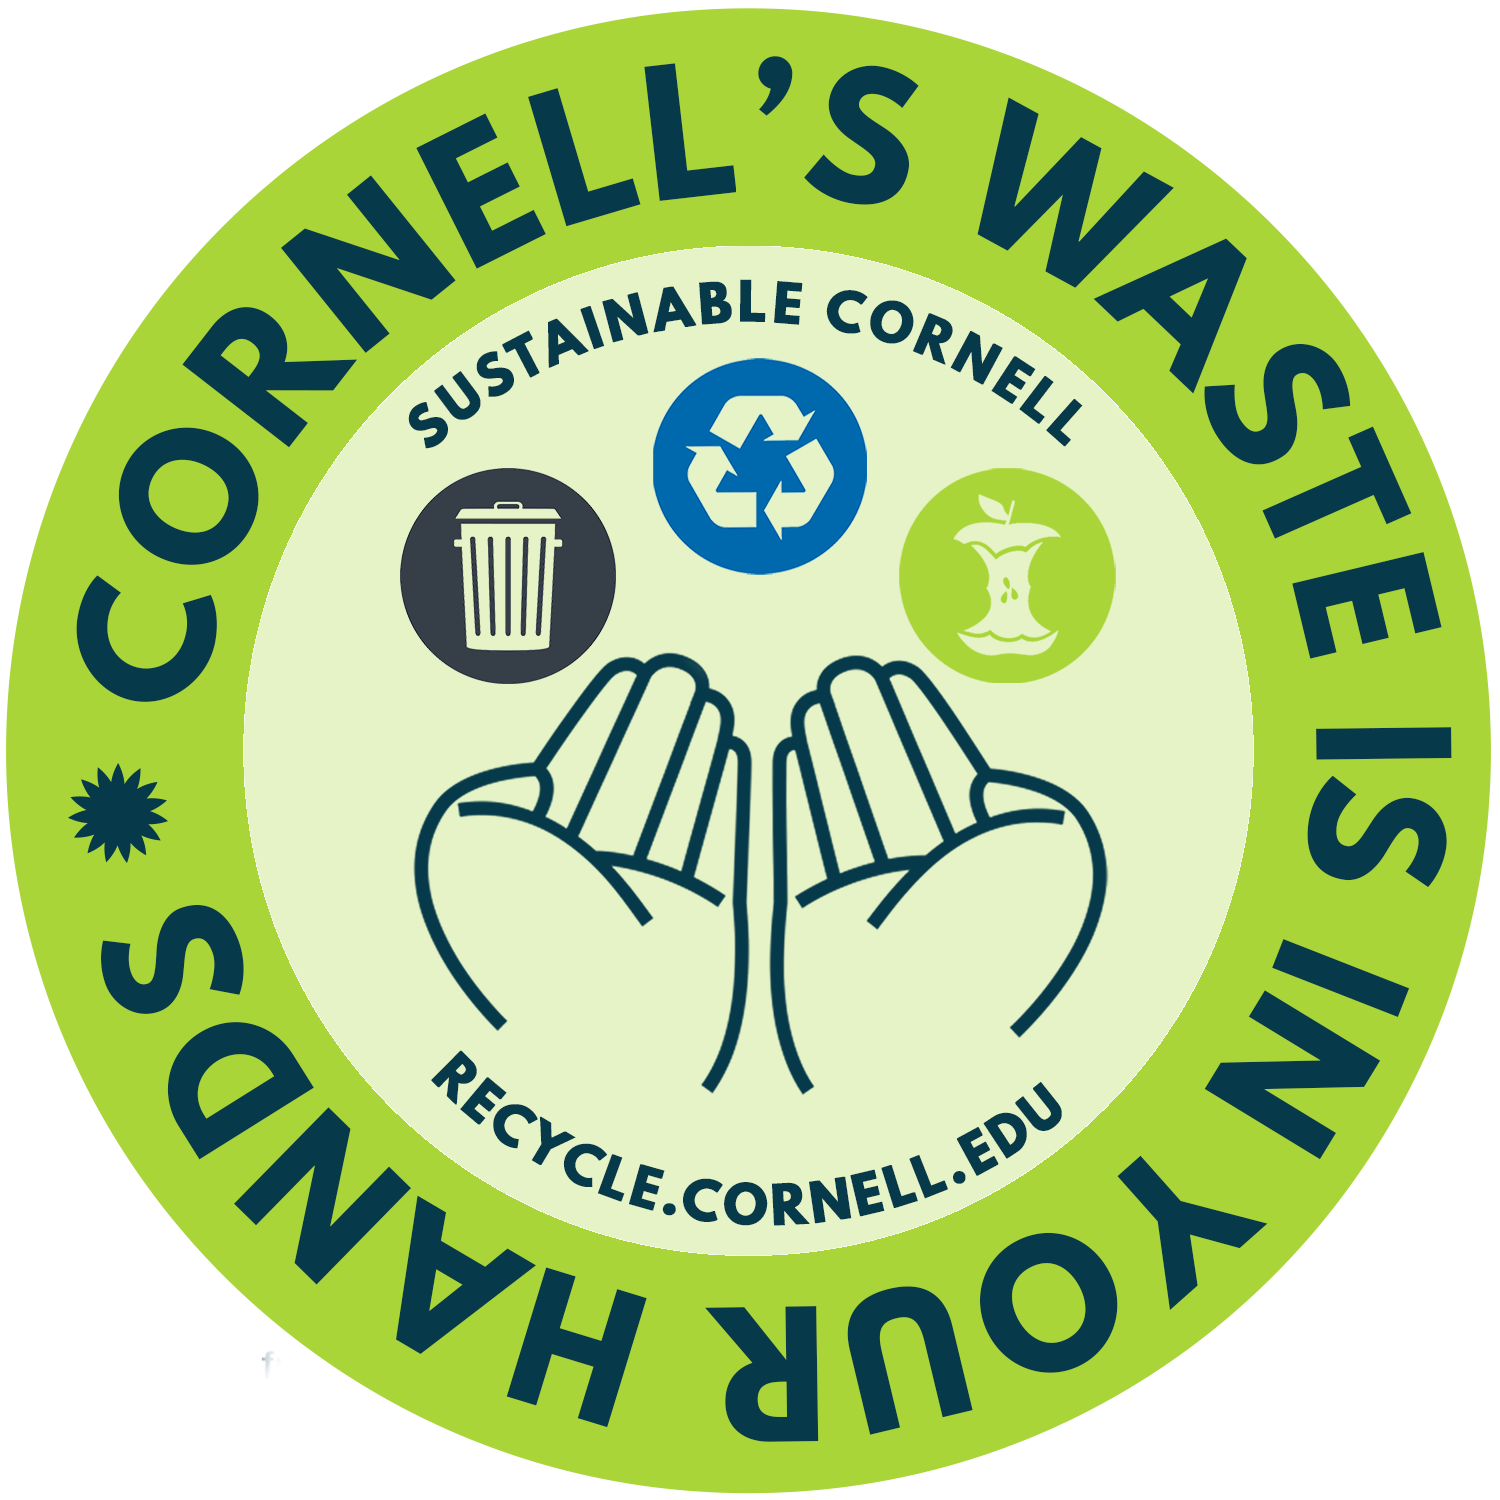 Round sticker with text 'Cornell's waste is in your hands'